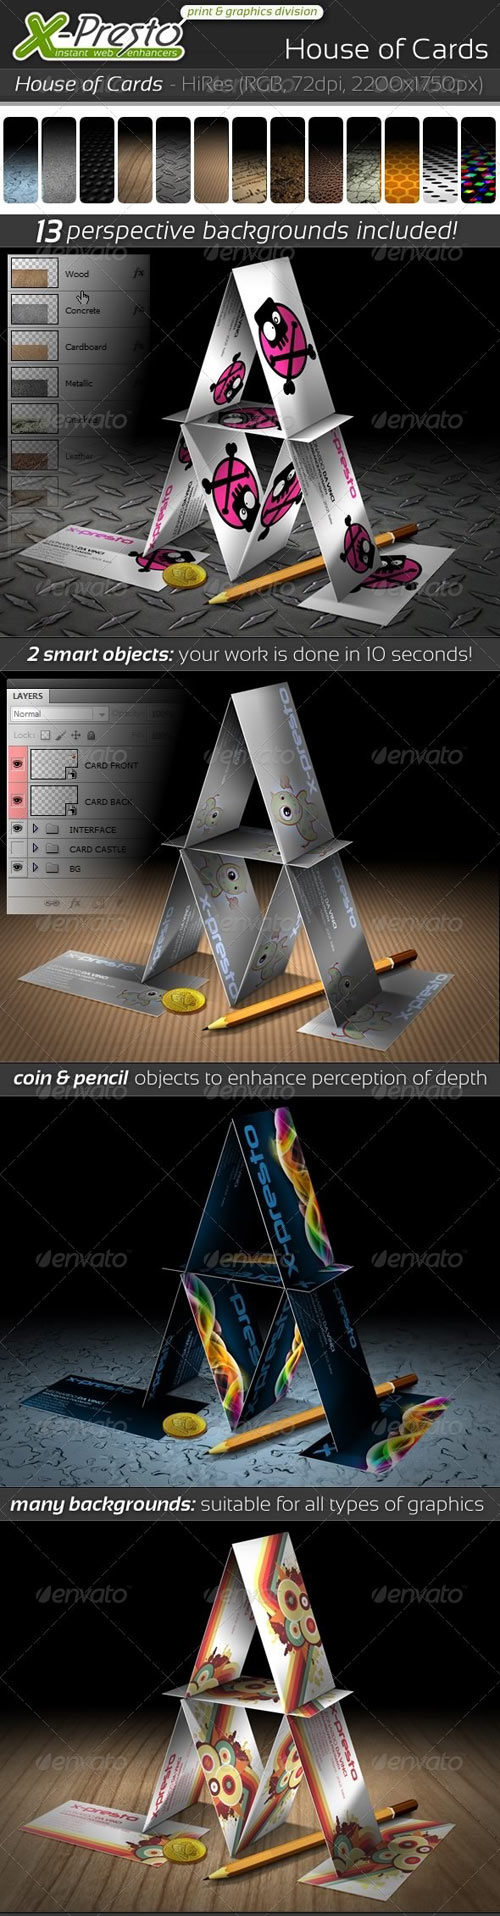 House of Cards - GraphicRiver